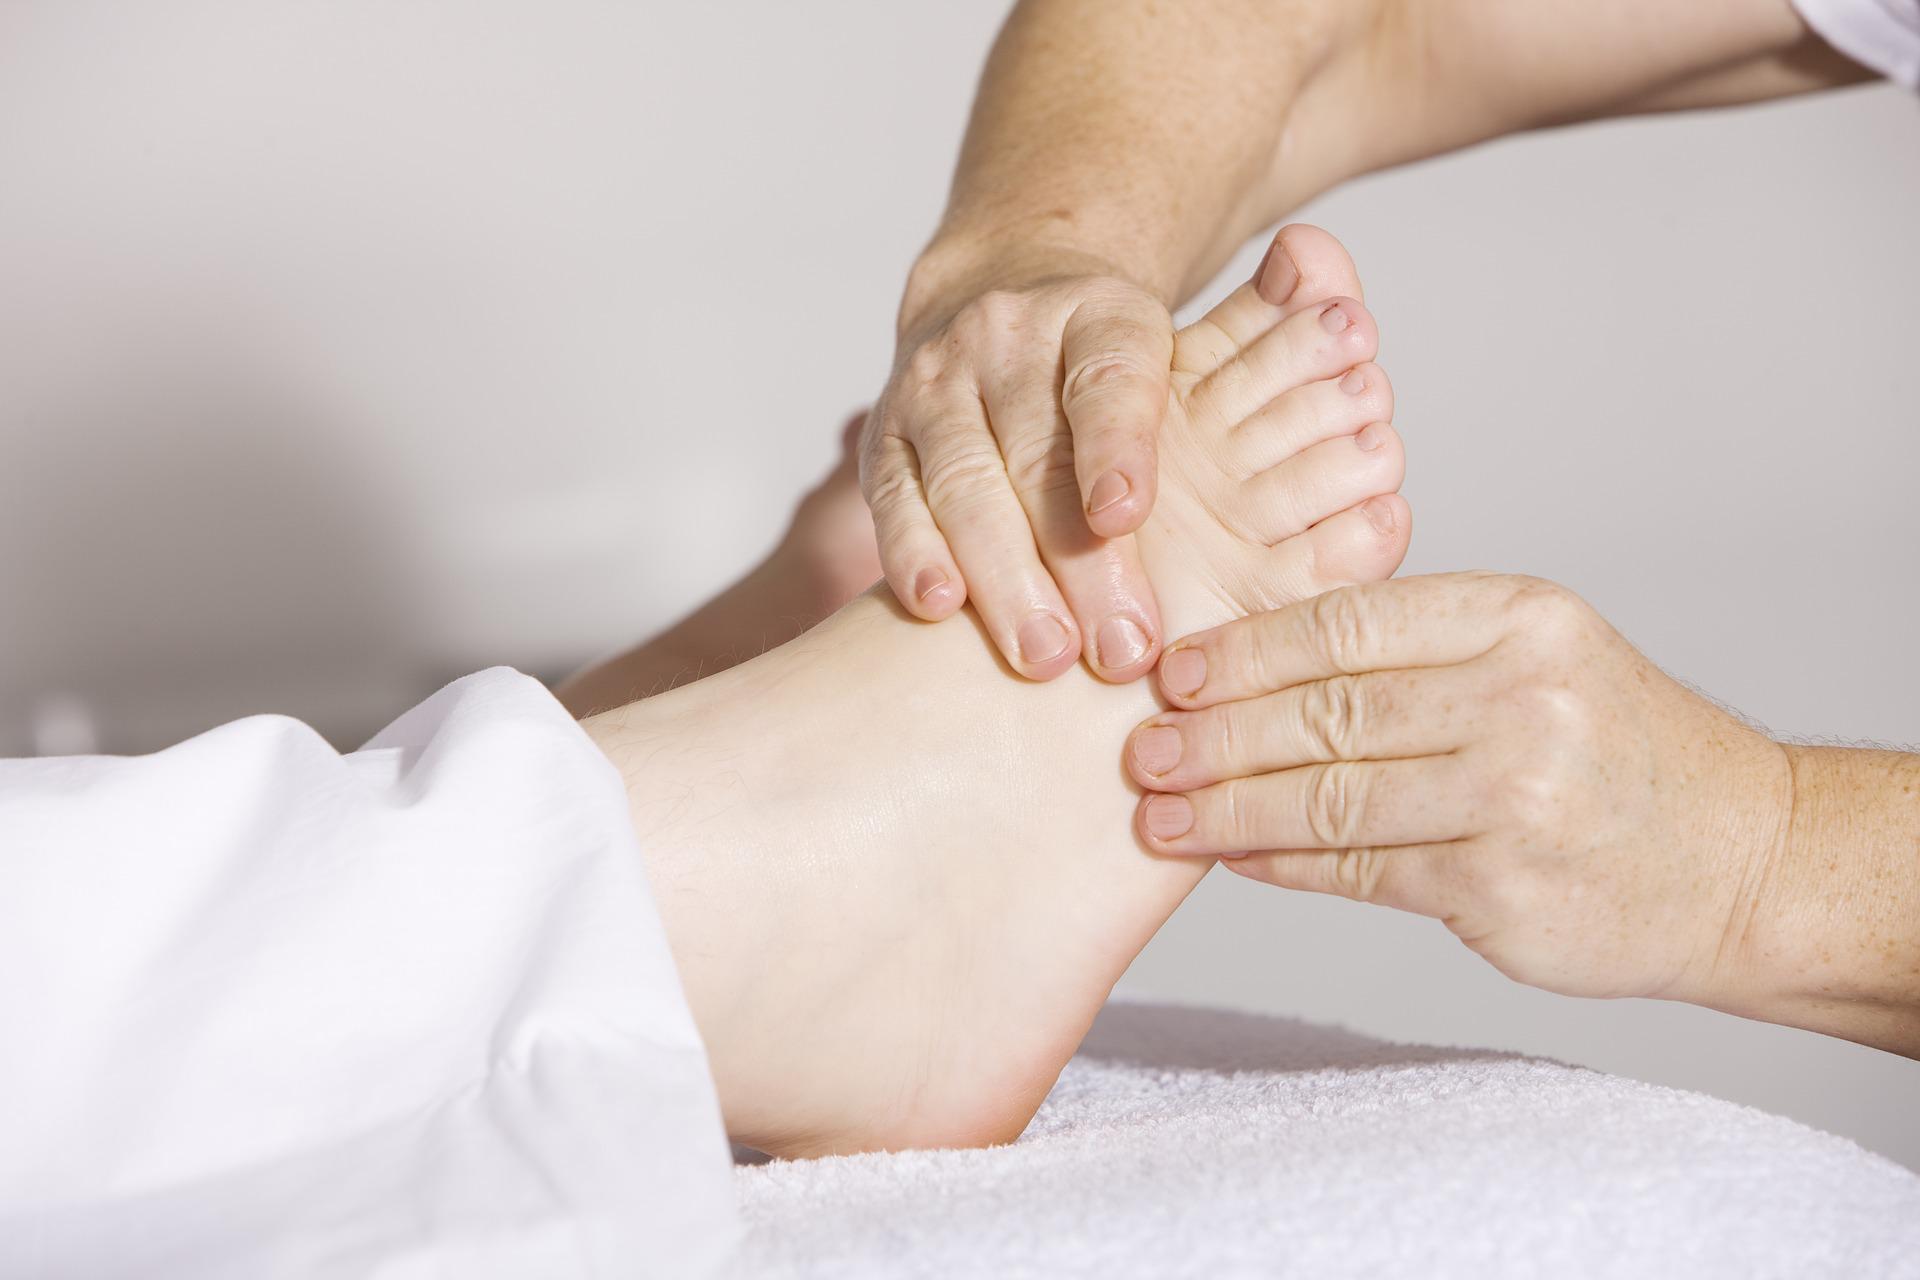 When To See A Podiatrist: Signs And Symptoms To Watch For